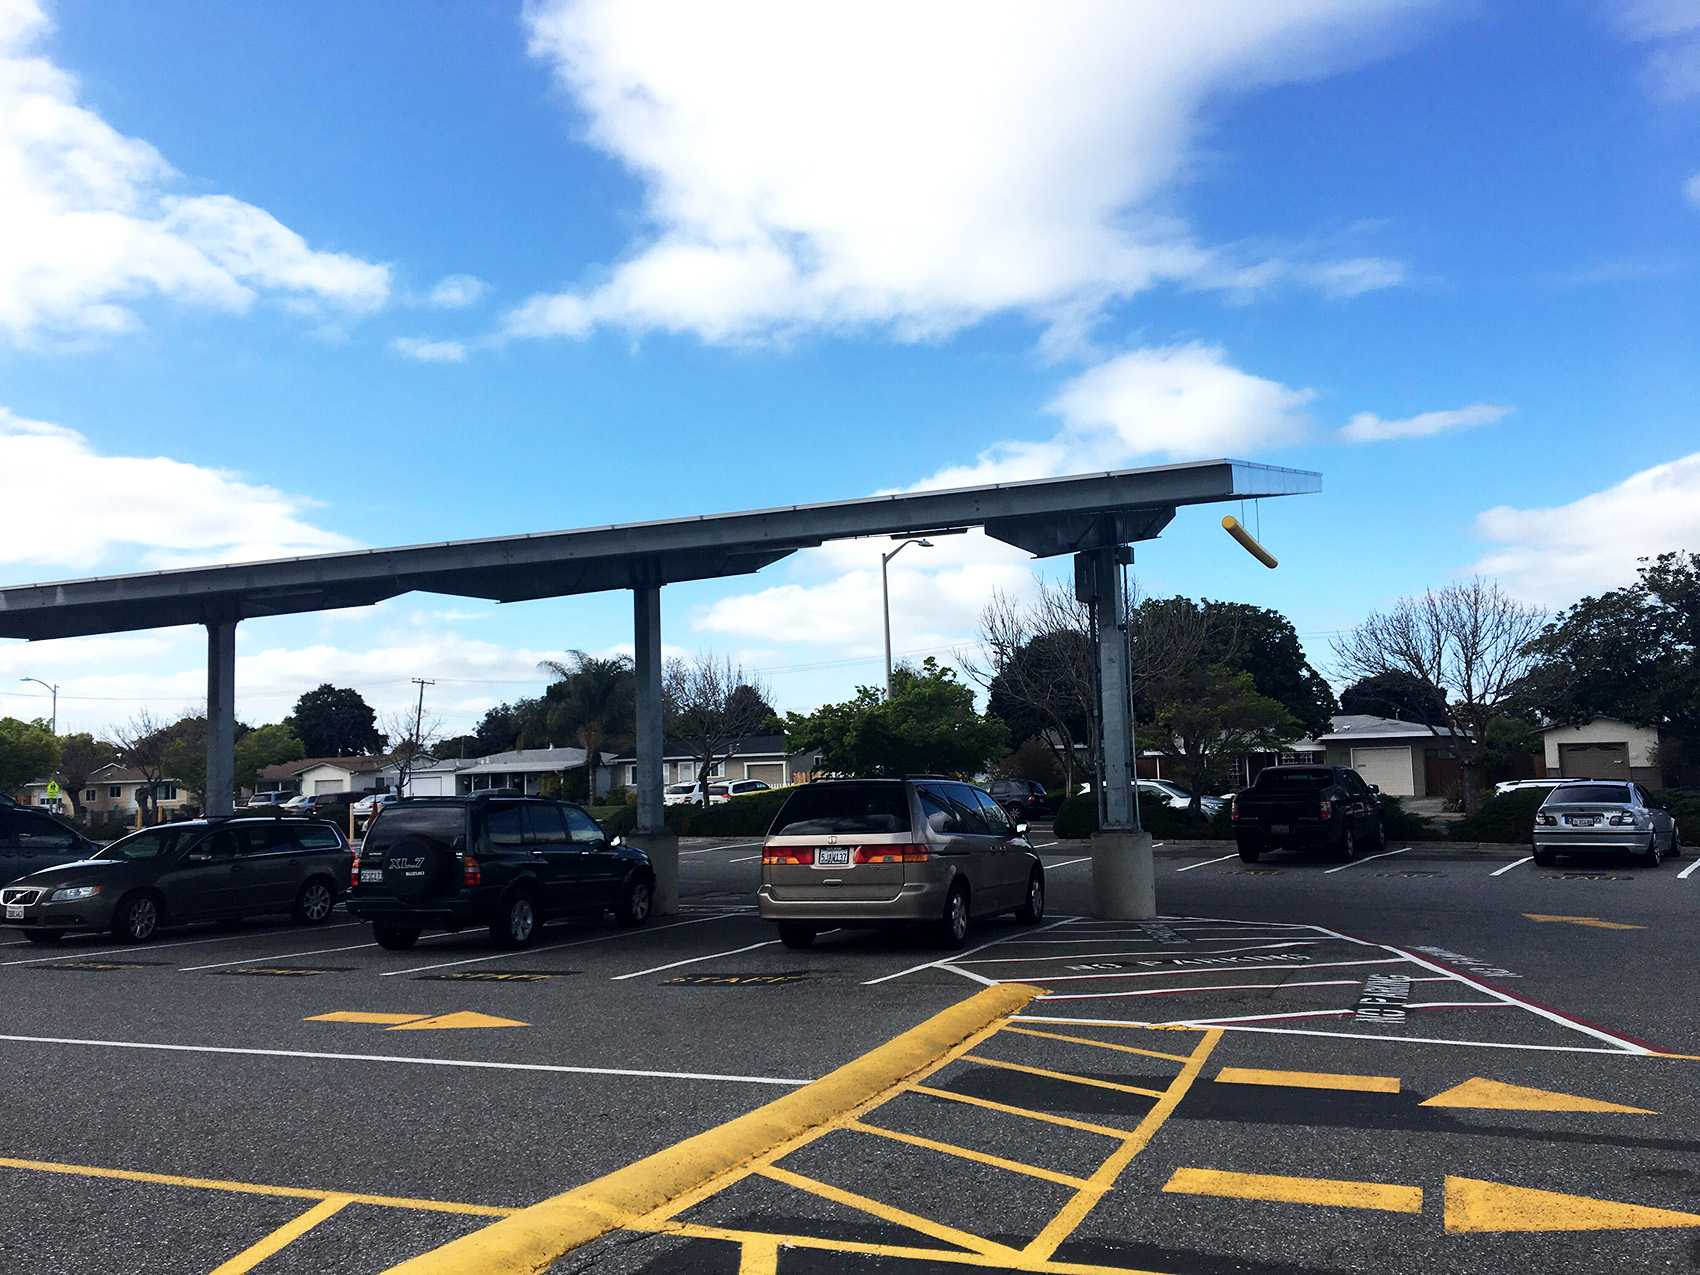 Solar parking coming to PAUSD